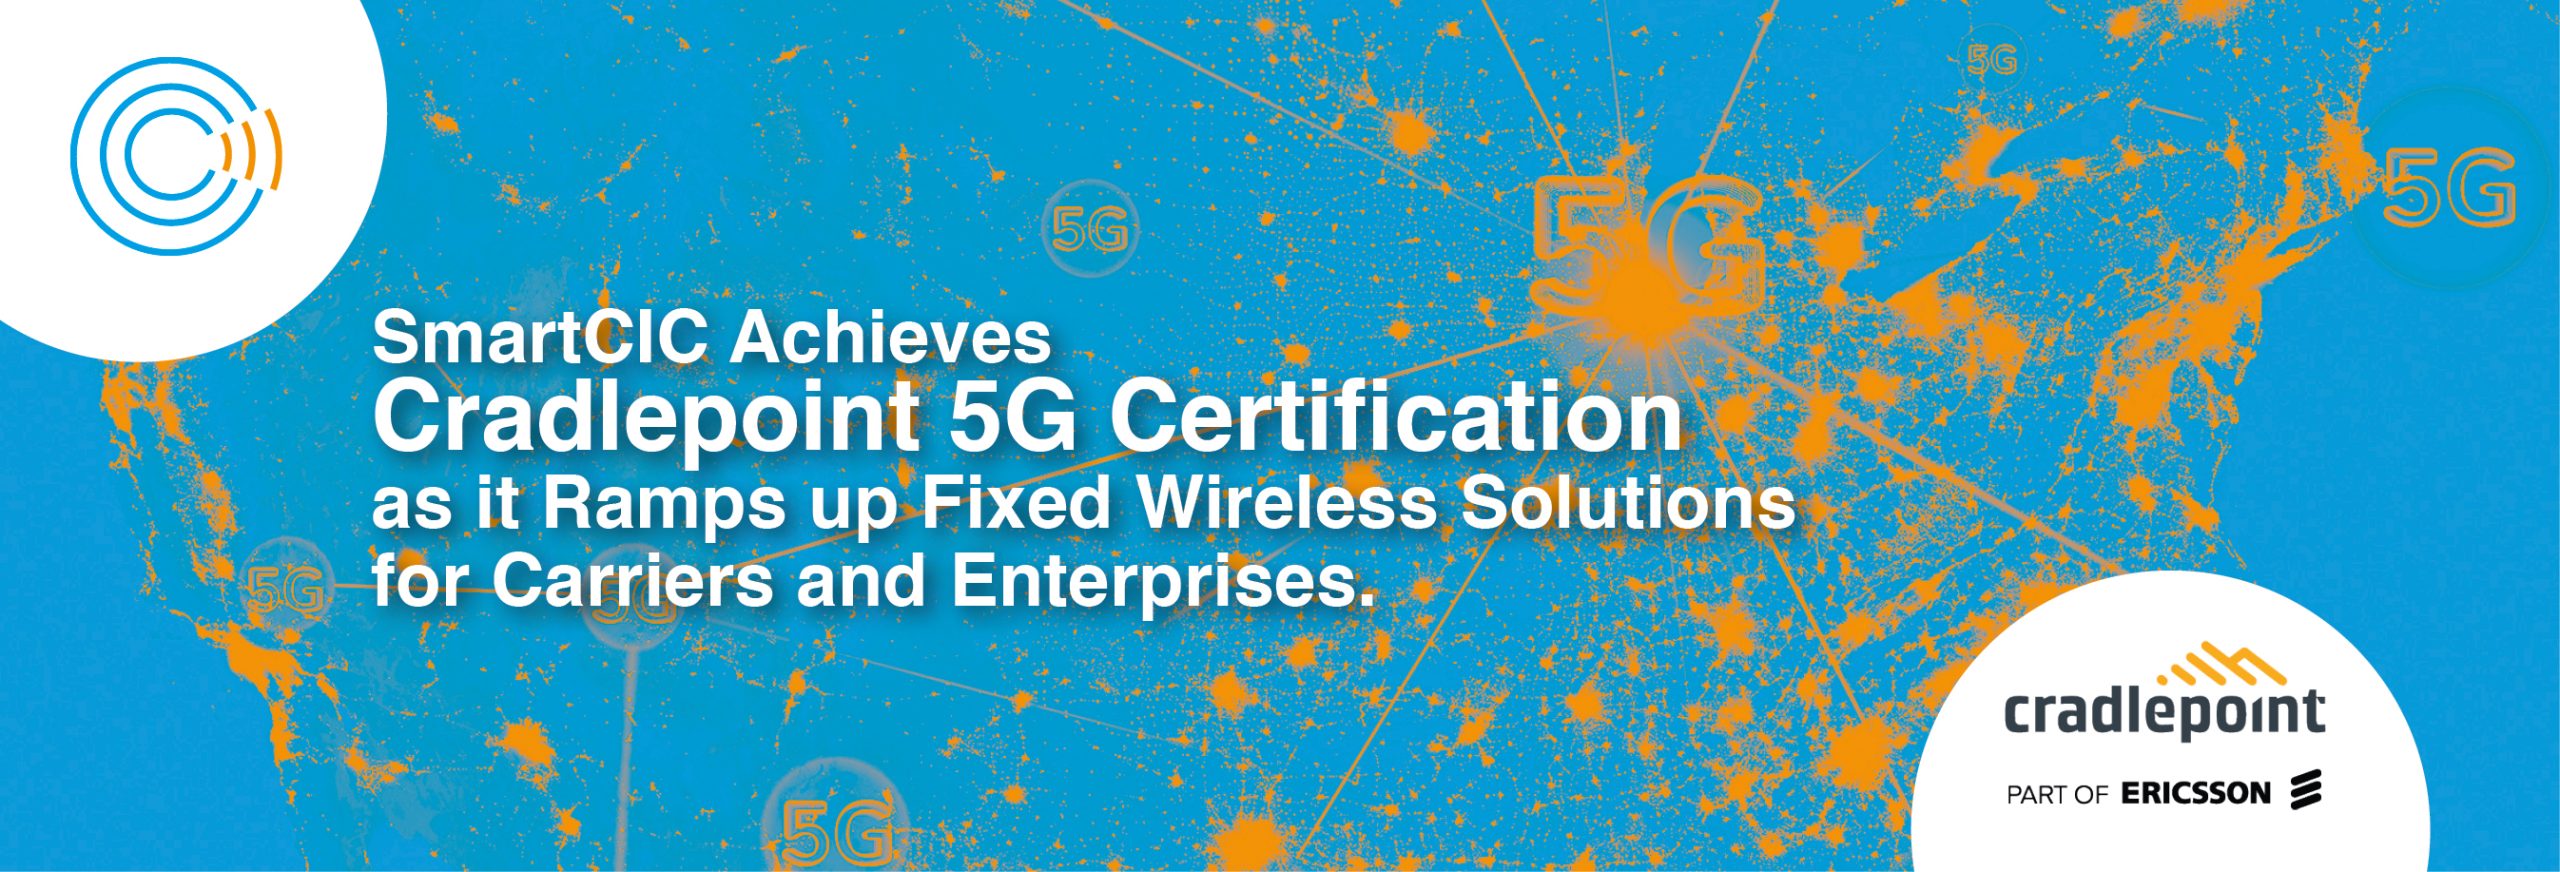 SmartCIC Achieves Cradlepoint 5G Certification as it Ramps Up Fixed Wireless Solutions for Carriers and Enterprises